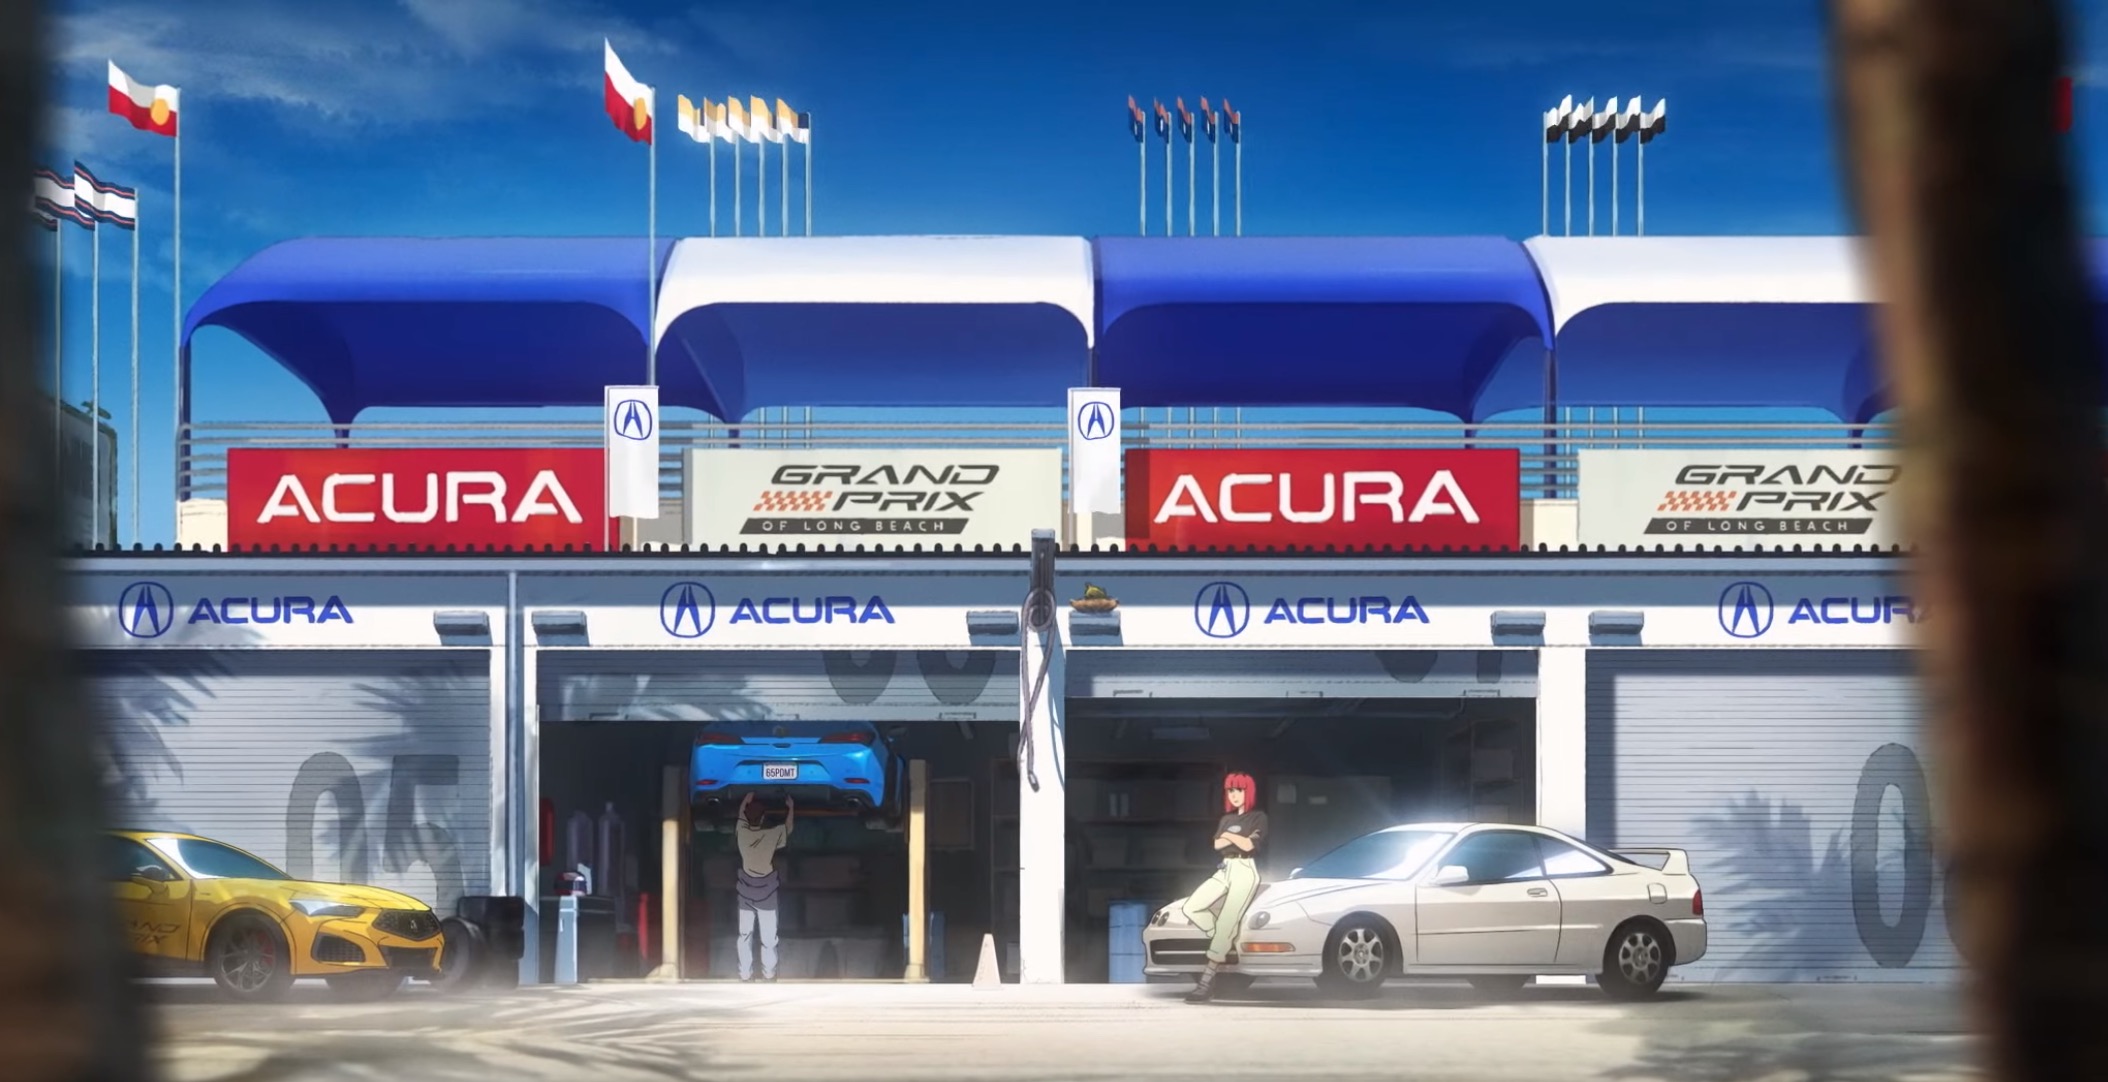 Gradient Racing Confirmed For Long Beach With Backing From Acura Anime  Series  dailysportscarcom